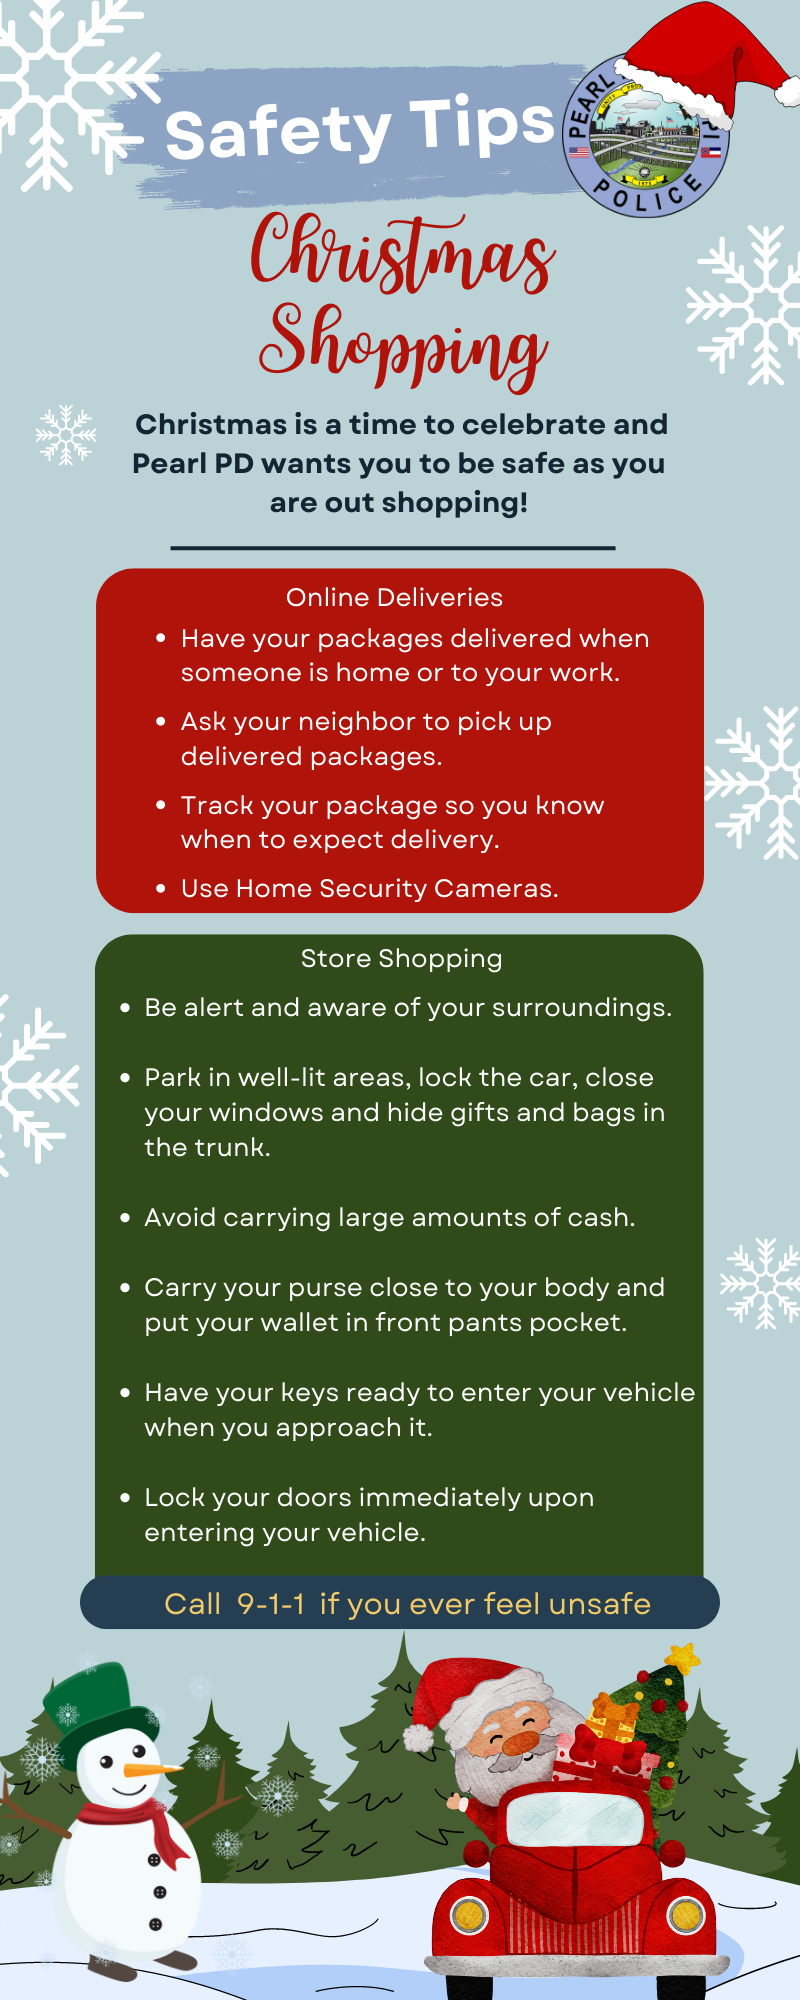 Christmas Shopping Safety